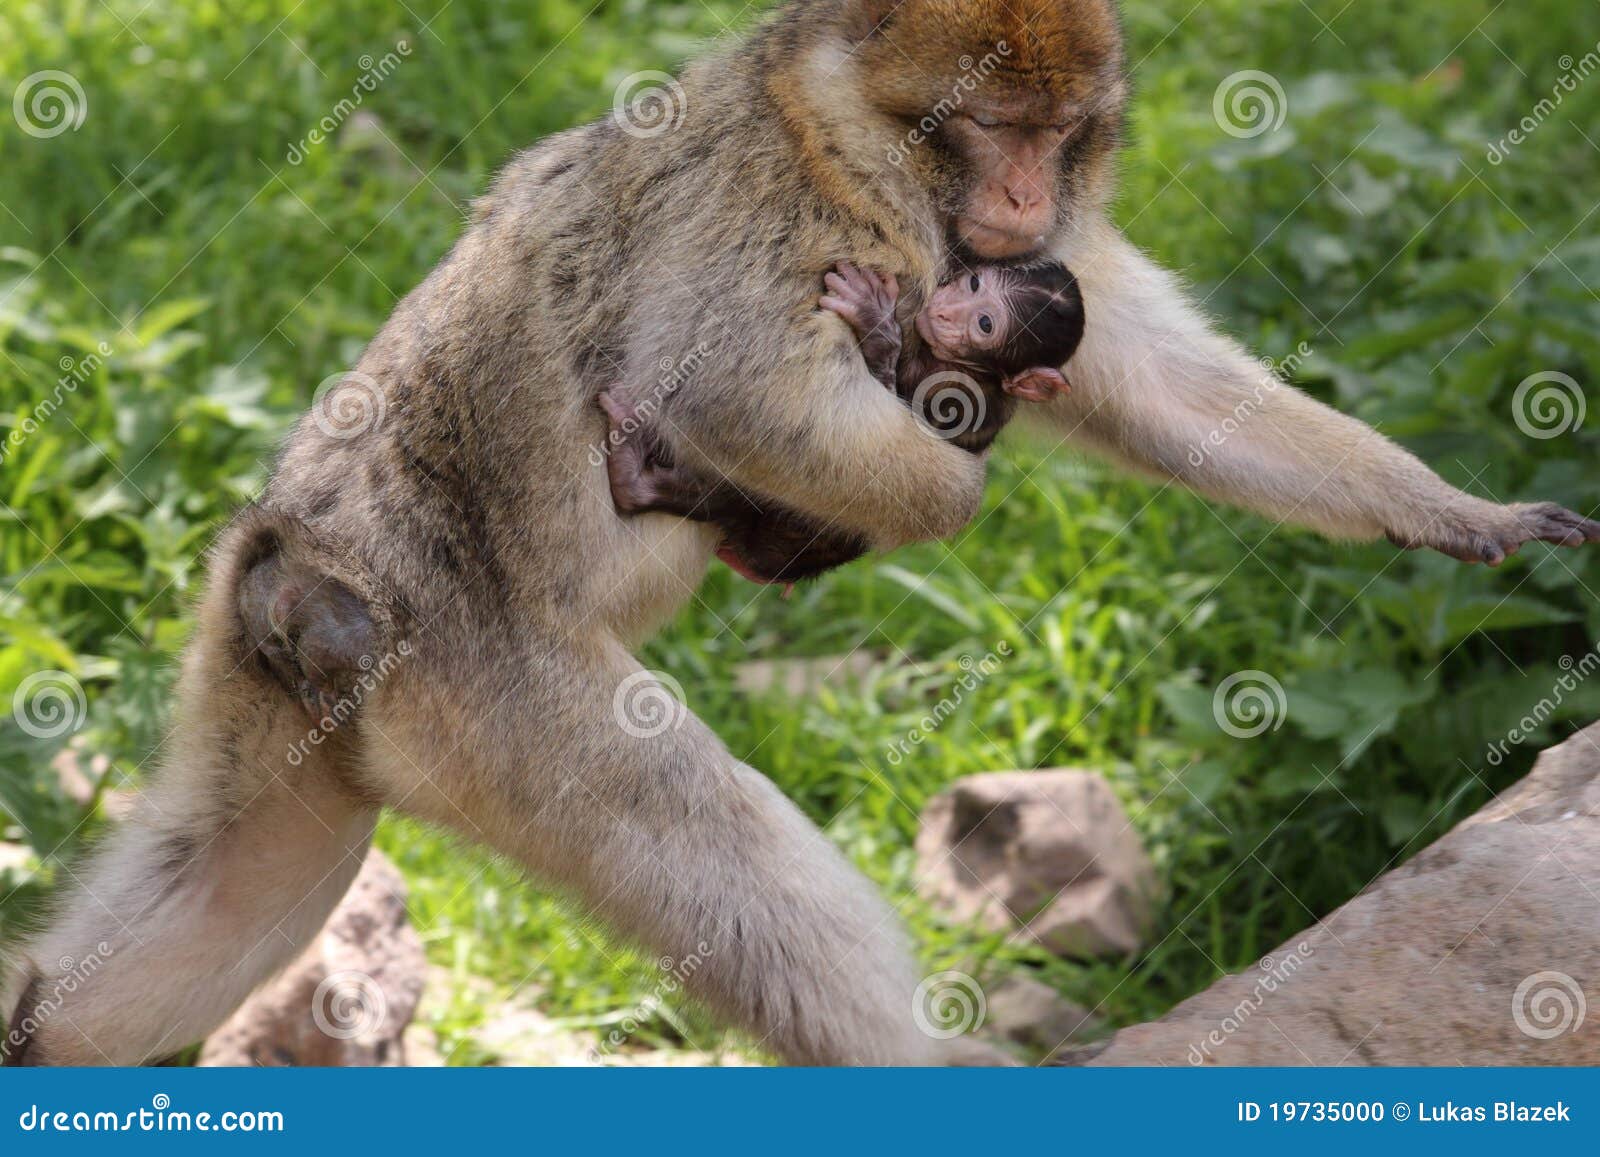 mother care - barbary macaque